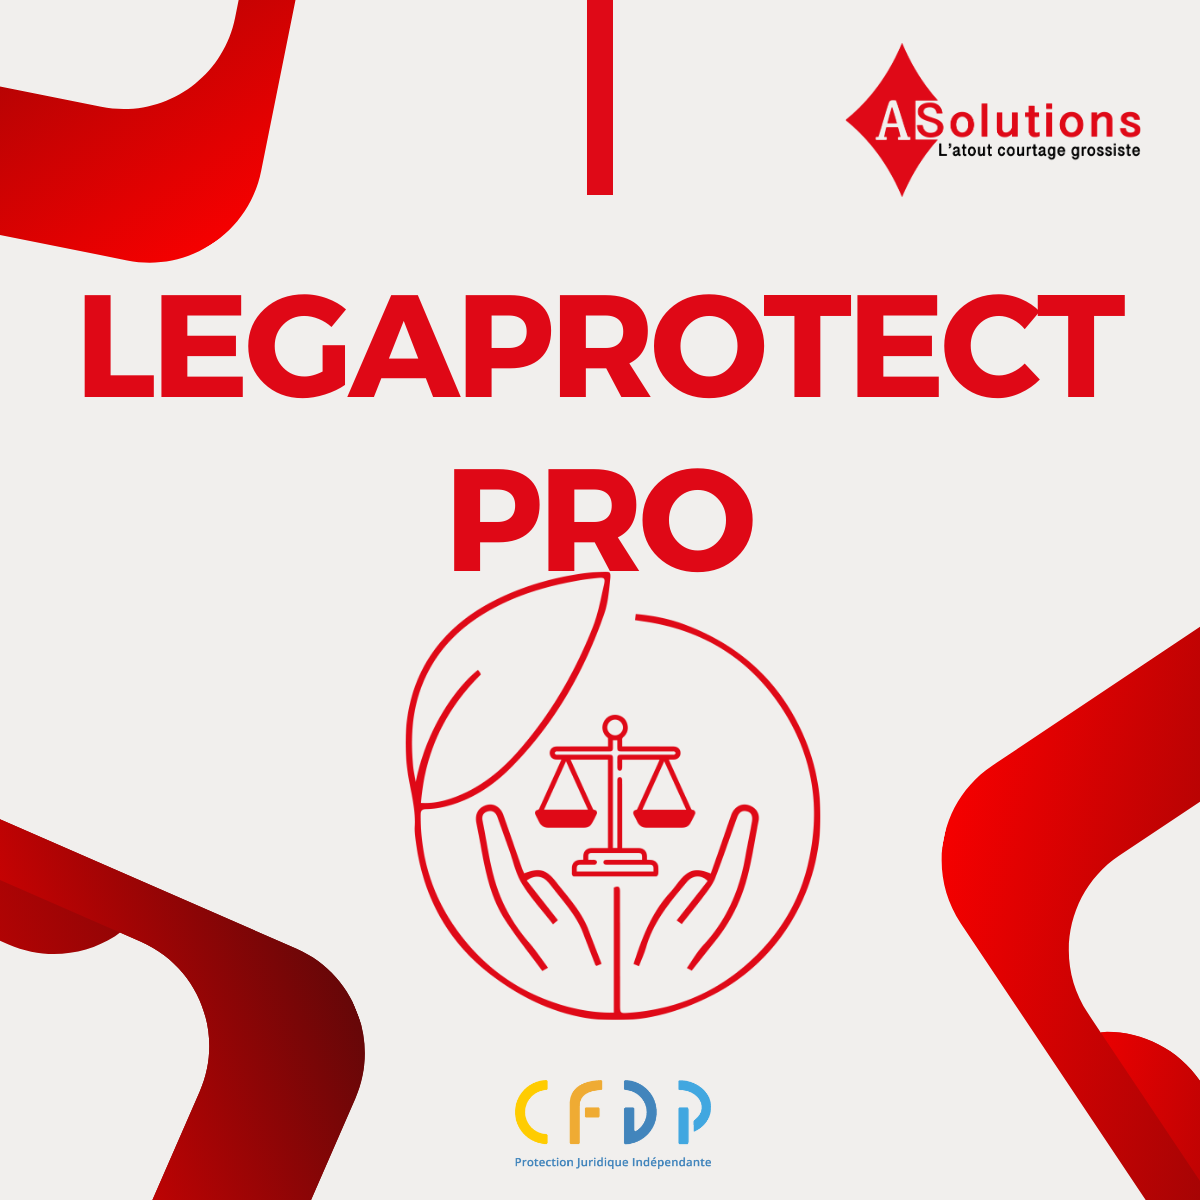 Legaprotect Pro